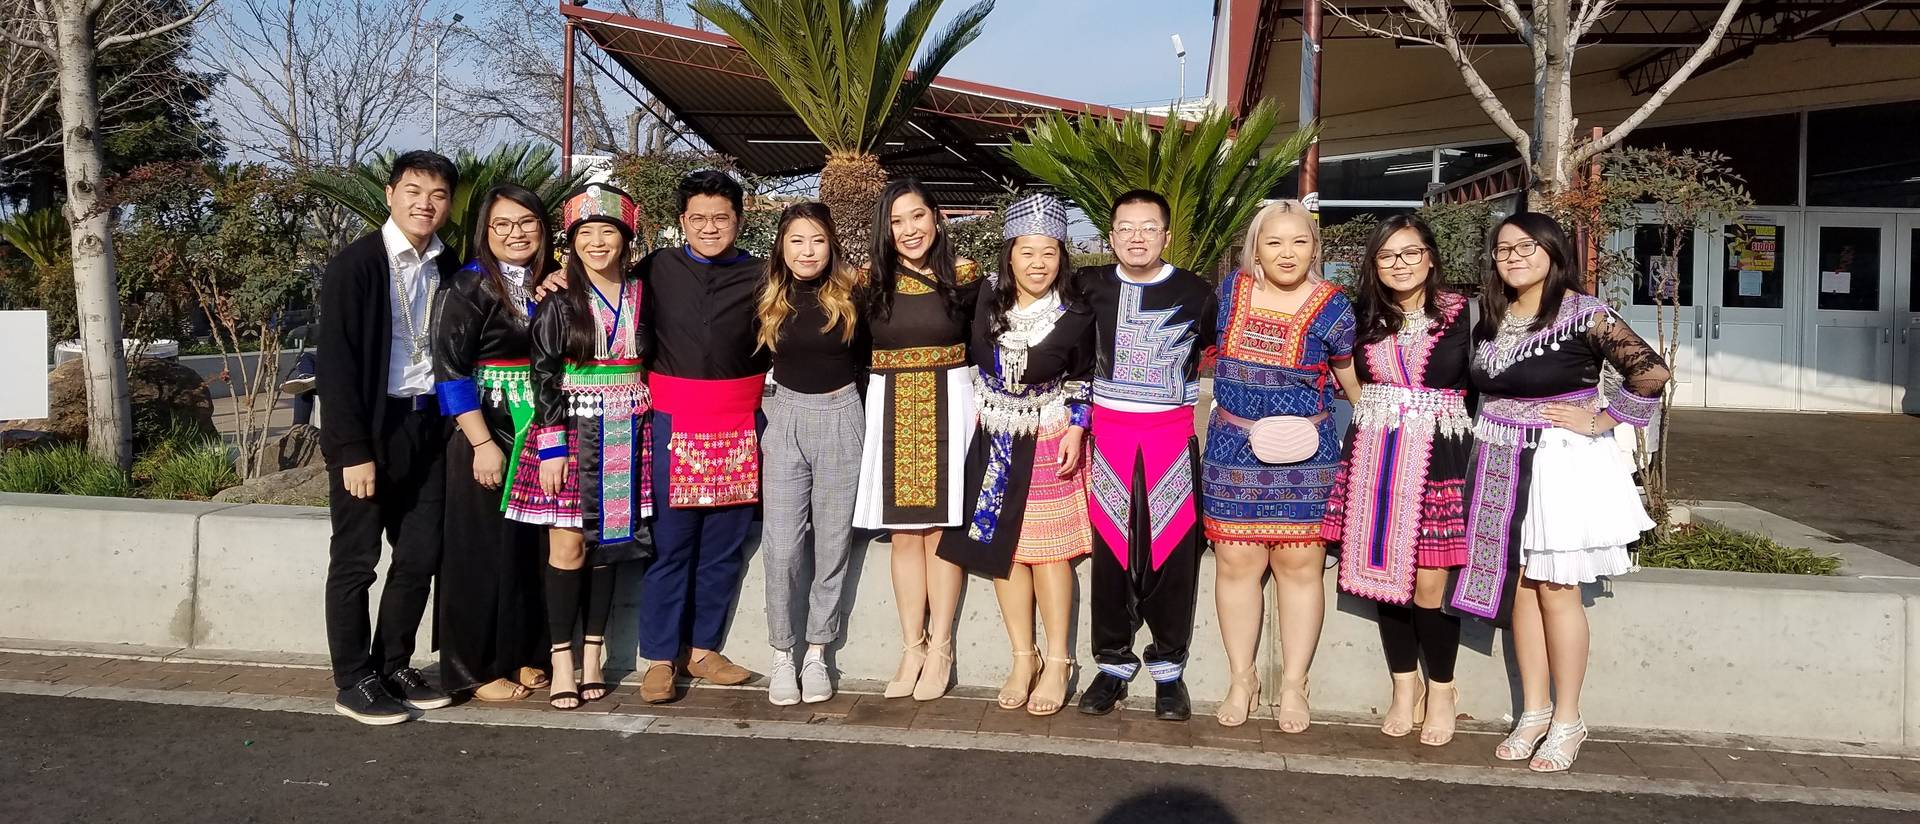 A Winterim immersion took UW-Eau Claire students to California, where they participated in Fresno’s Hmong New Year festivities.